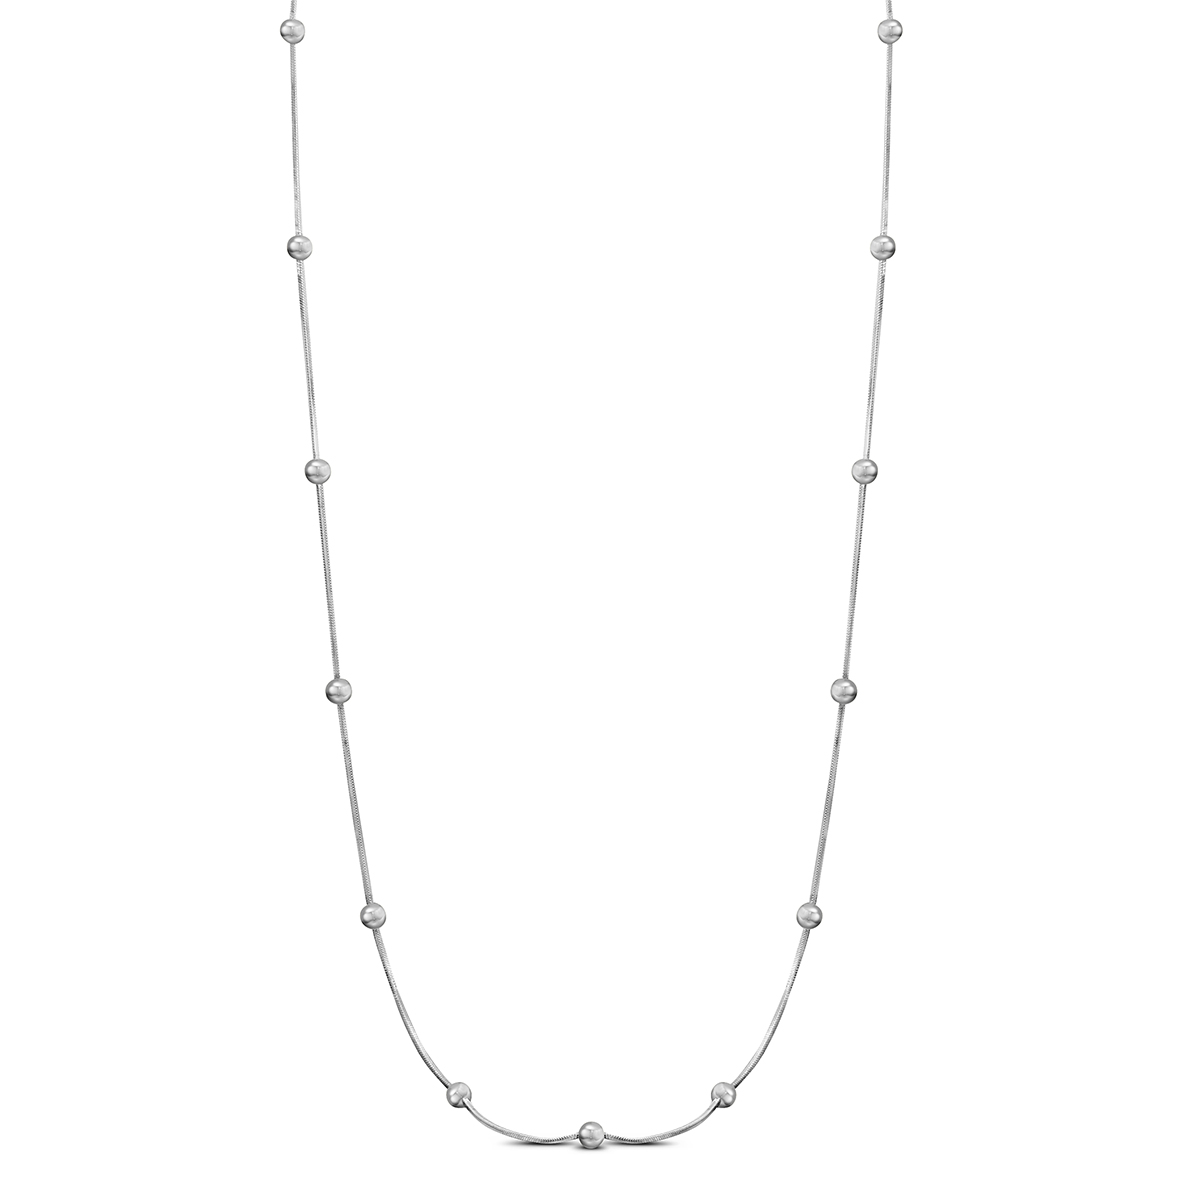 Long Silver Ball Necklace in .925 Sterling Silver